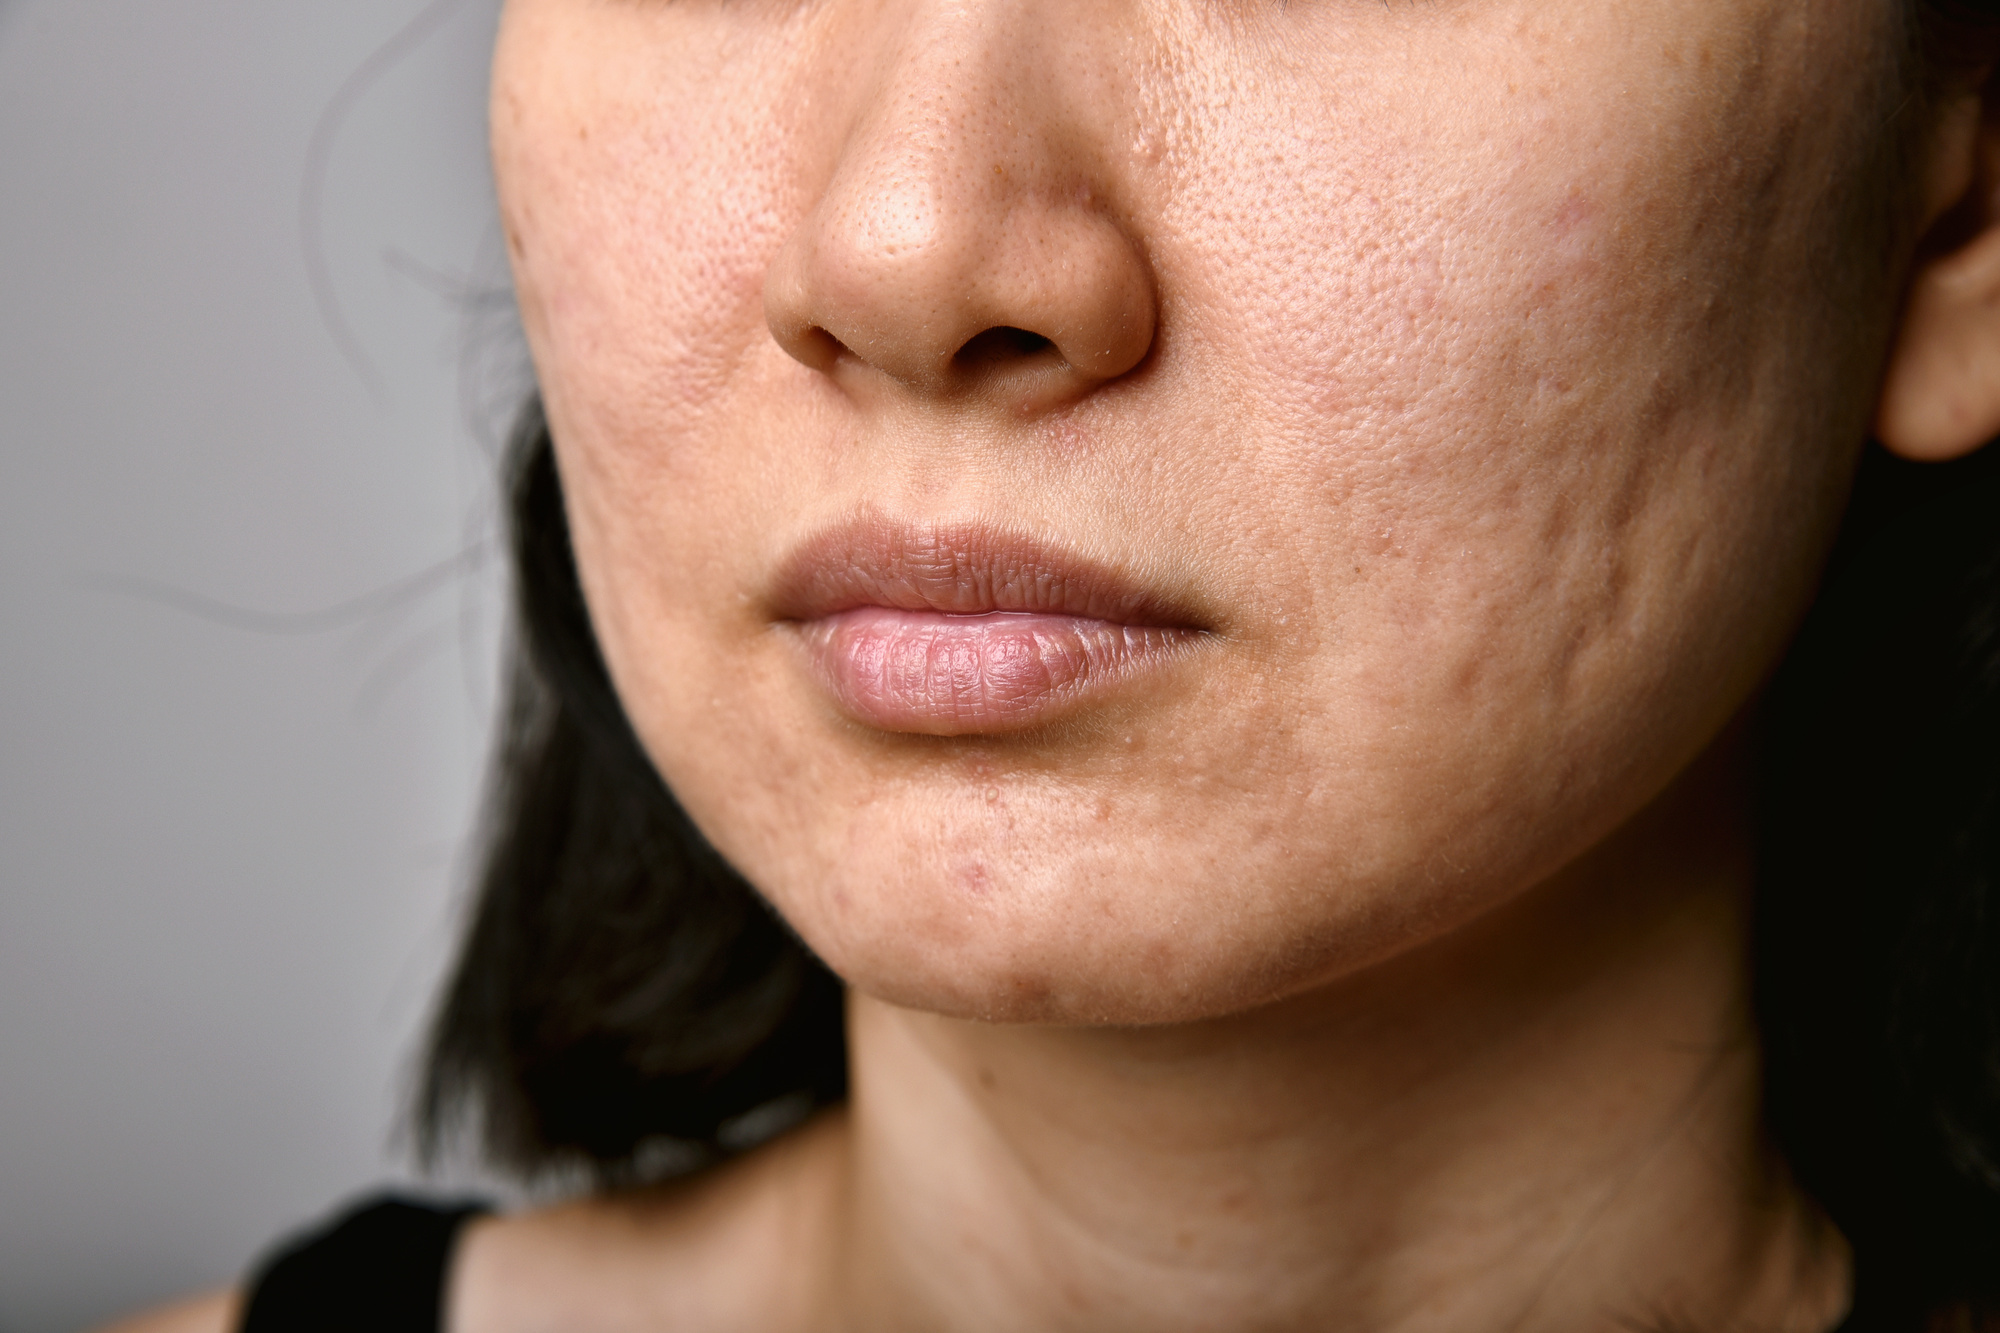 Woman with Acne Problem